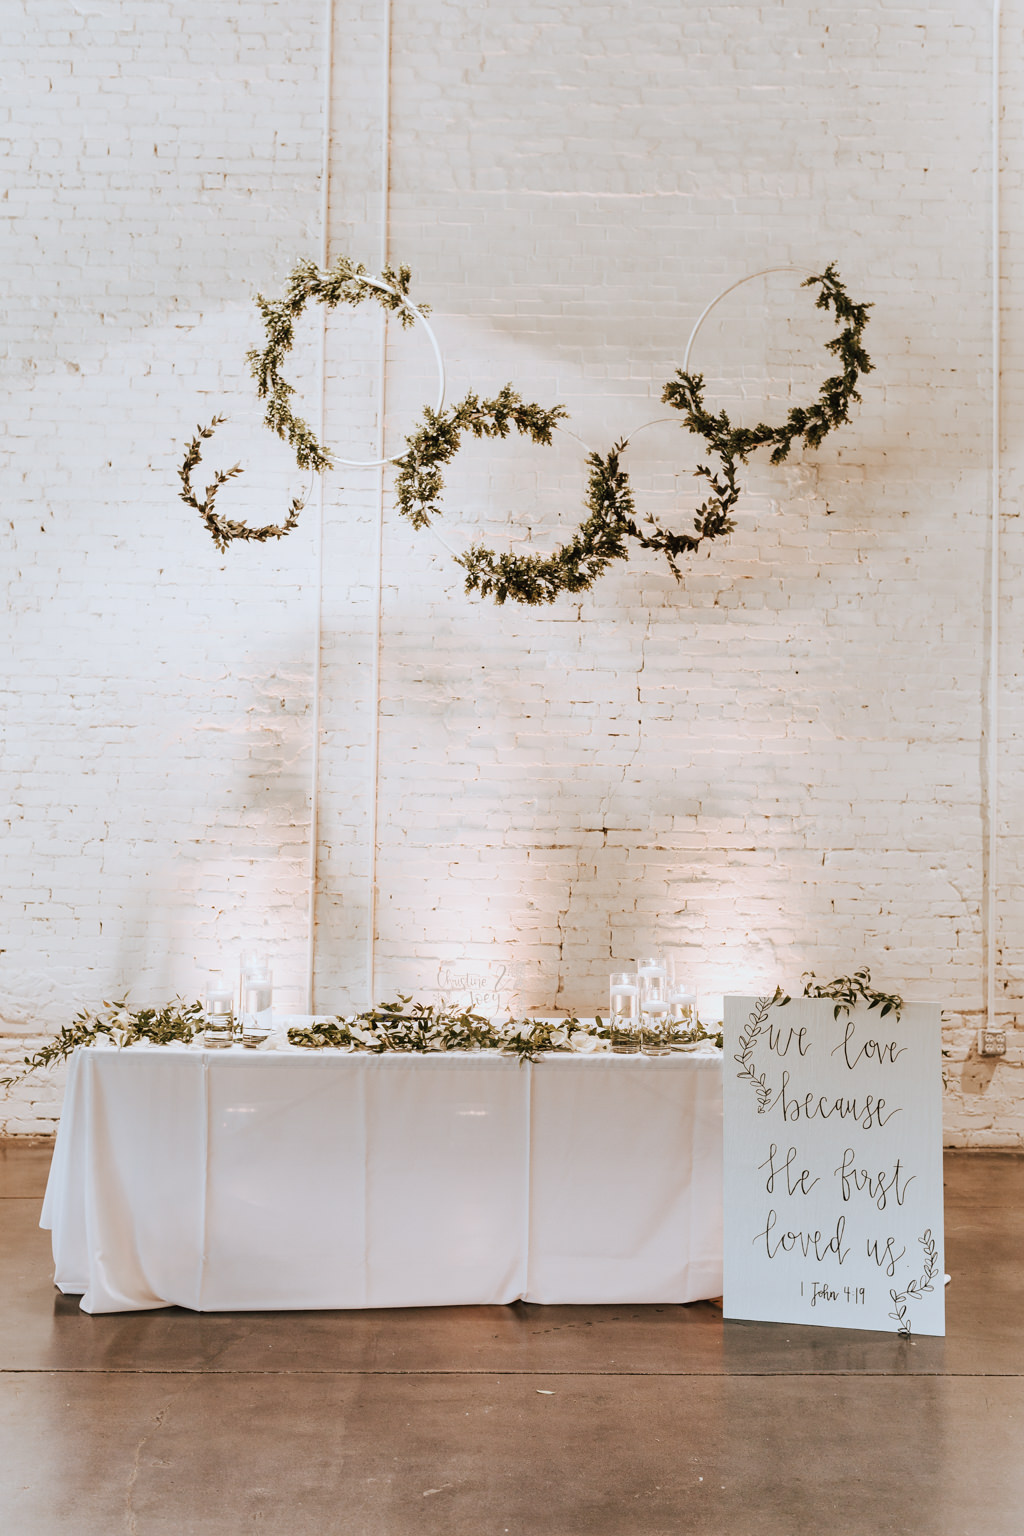 Wedding Reception Decor, Sweetheart Table with White Tablecloth, Greenery Garland, Glass Cylinders with Floating Candles, White Wedding Sign, White Brick Wall Backdrop, Hanging Rings with Greenery Garland | Lakeland Industrial Wedding Venue HAUS 820